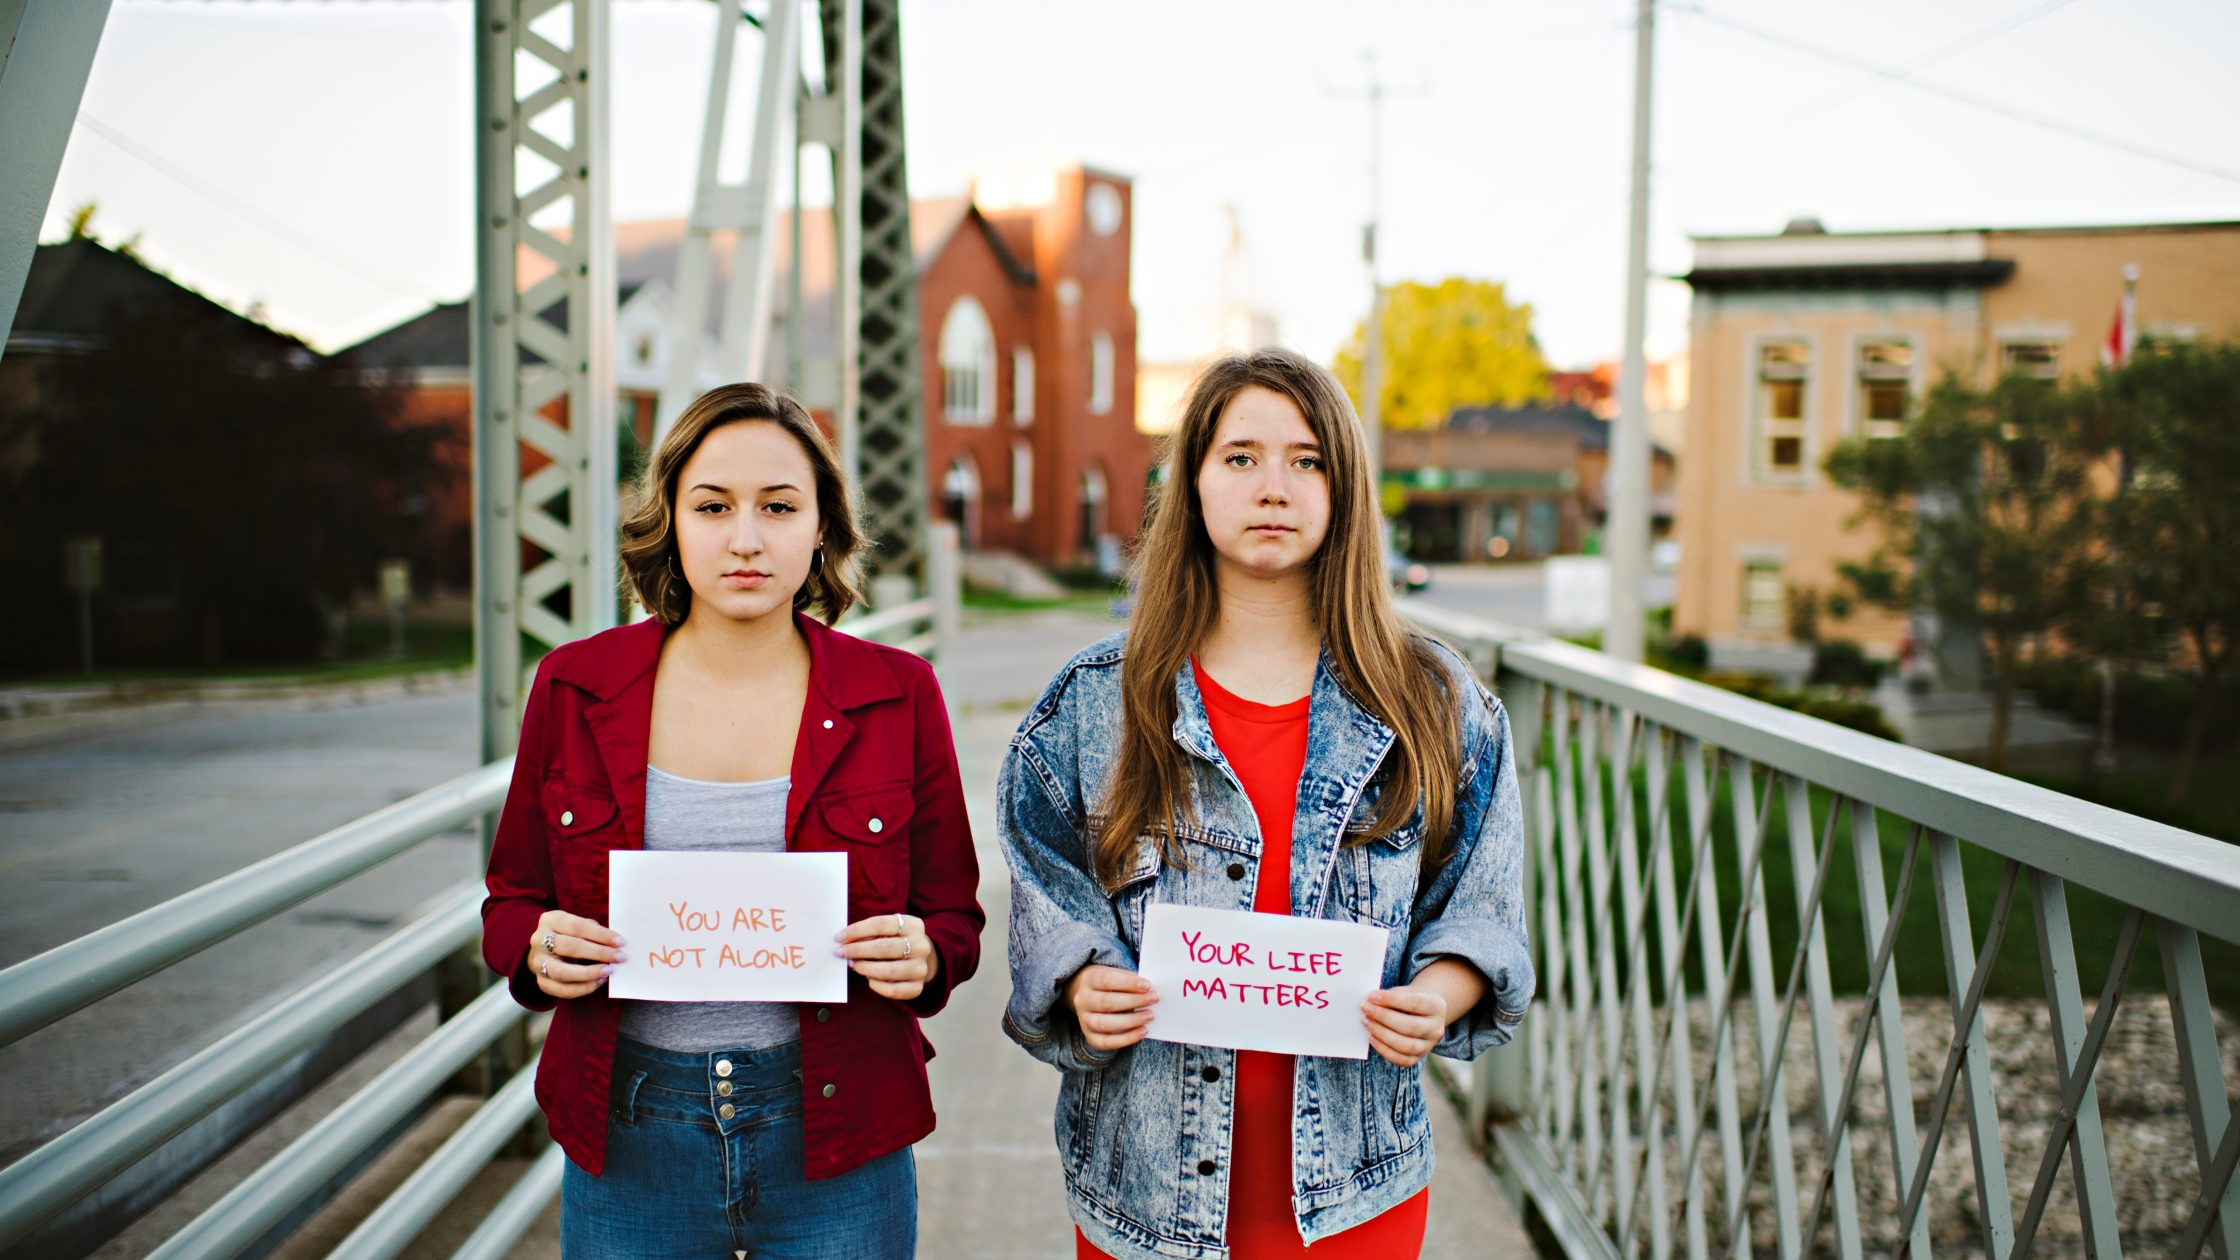 Gretta Dotzert and Olivia Miller were inspired to start their project after seeing another teen do something similar. (Photo: Hilary Gauld-Camilleri)